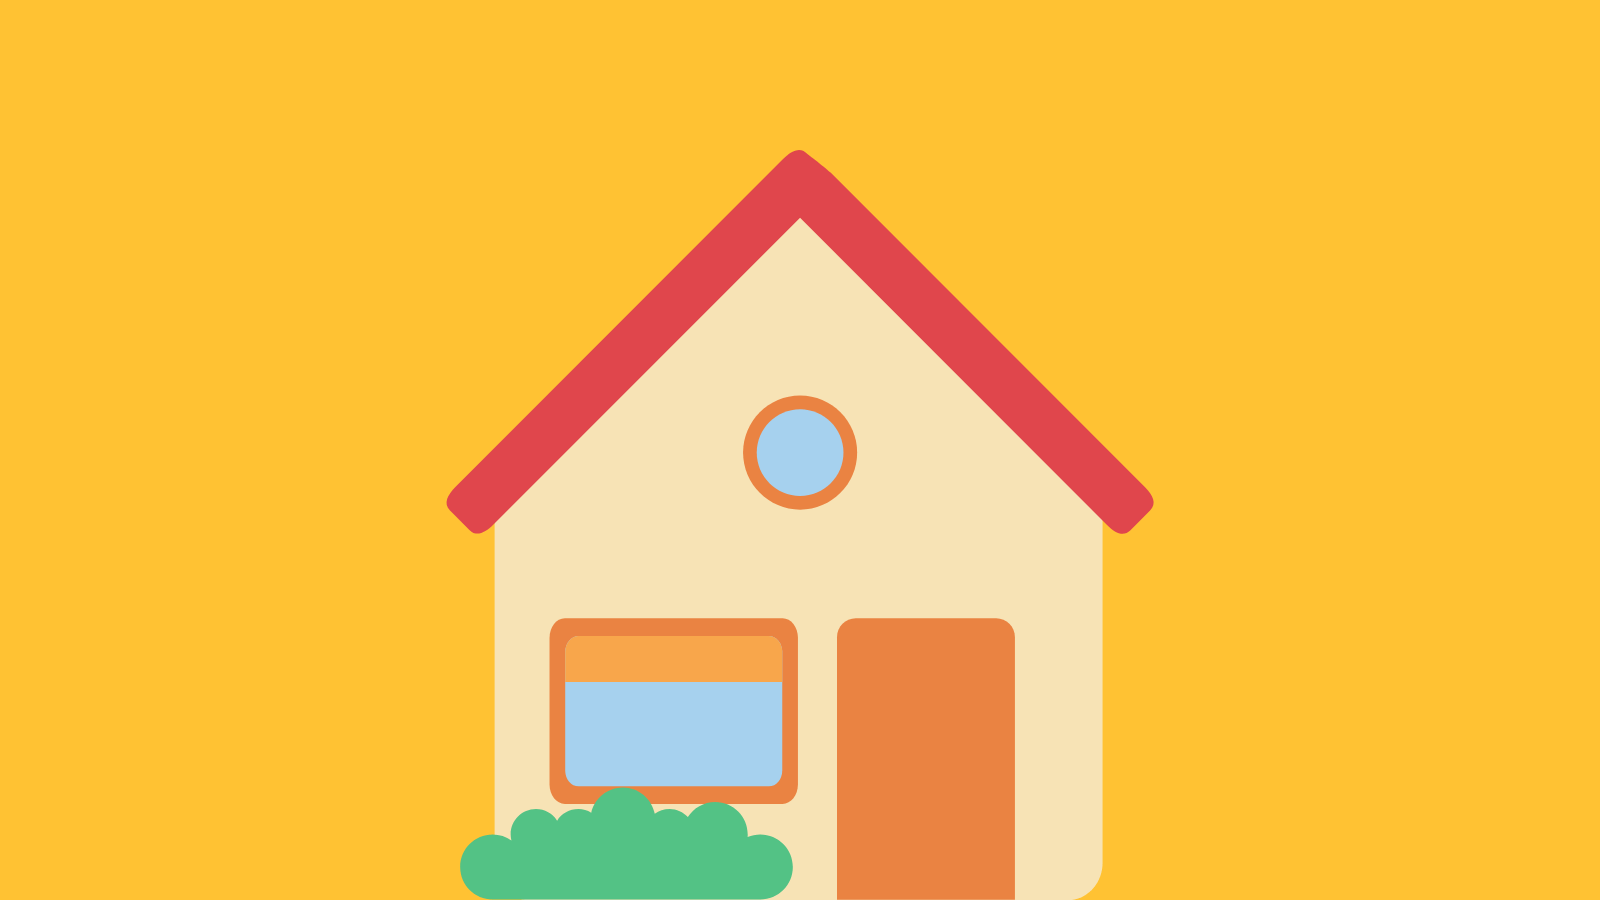 A simple illustration of a house 